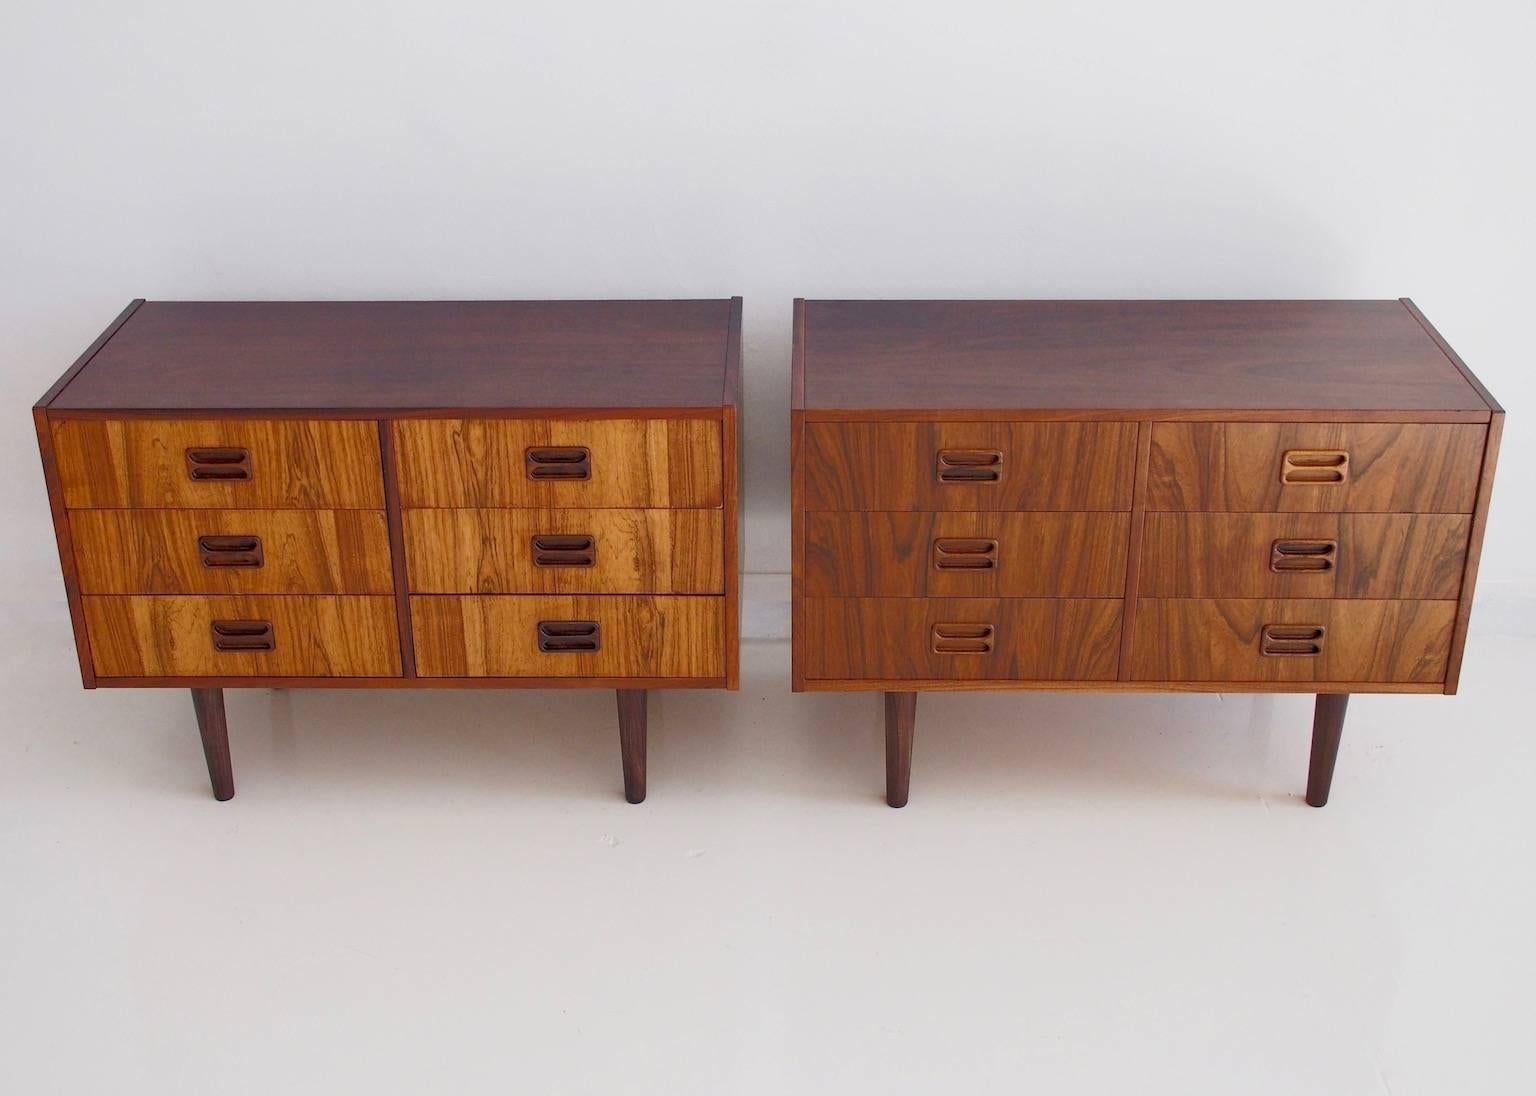 Two sideboards or commodes in slightly different color, veneered with rosewood. Front with six drawers, later mounted unoriginal legs. Recently restored, very good condition.